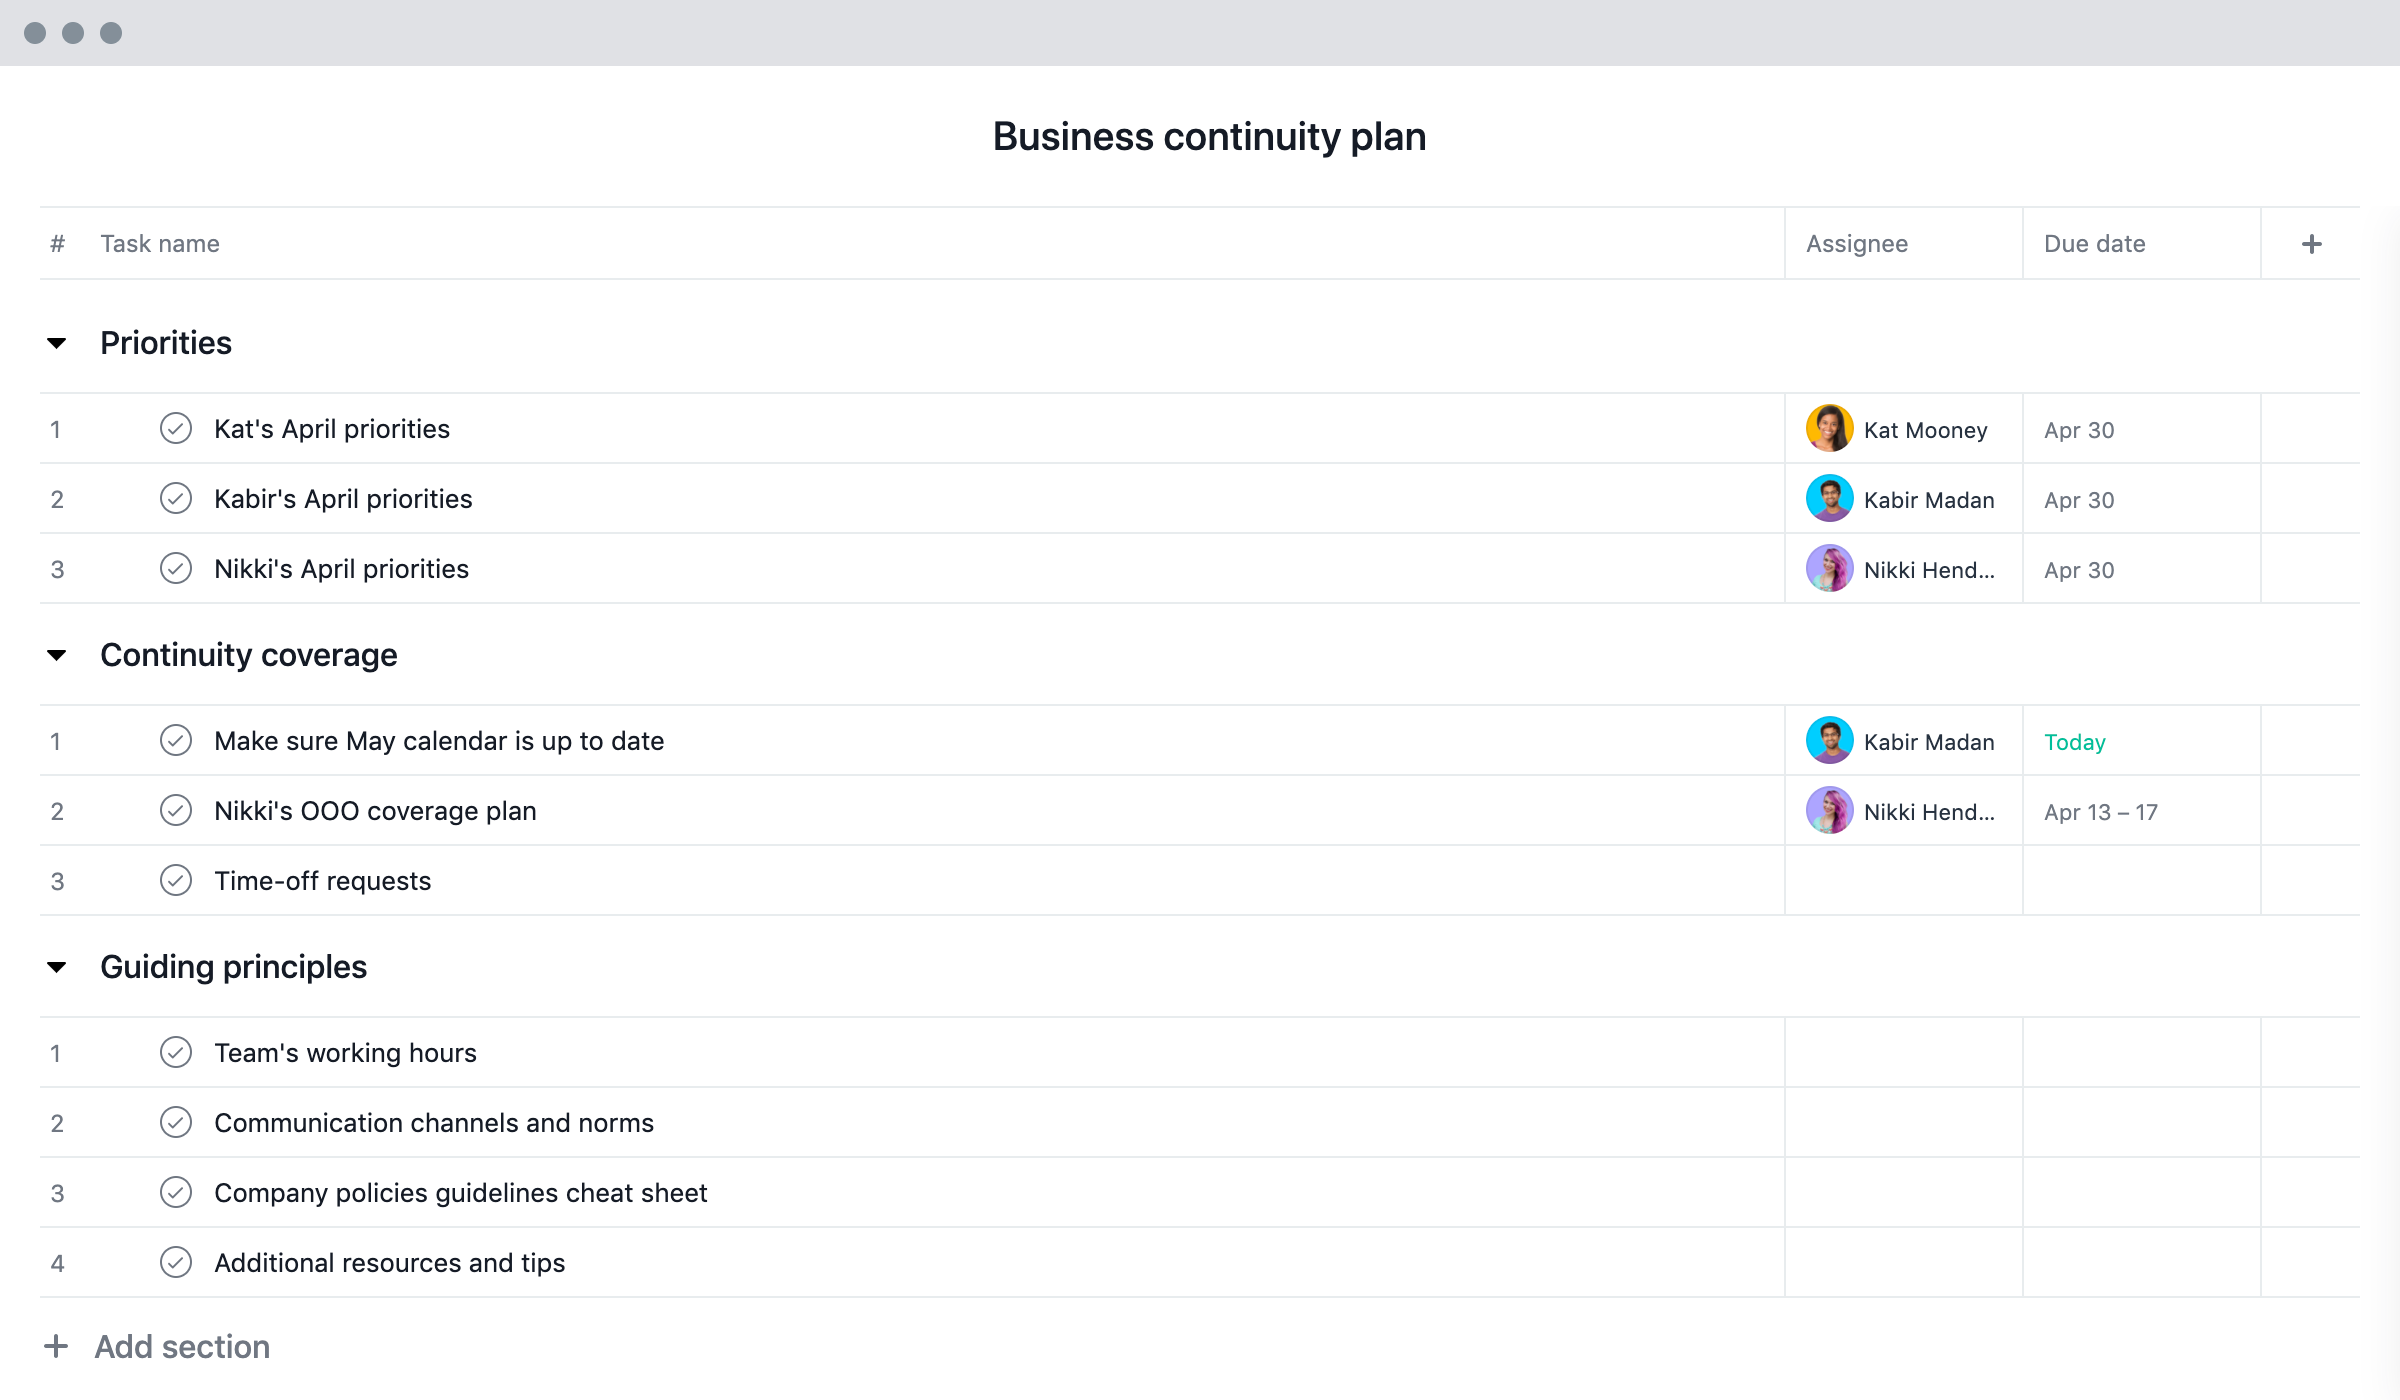 [old Product UI] Business continuity plan (example)